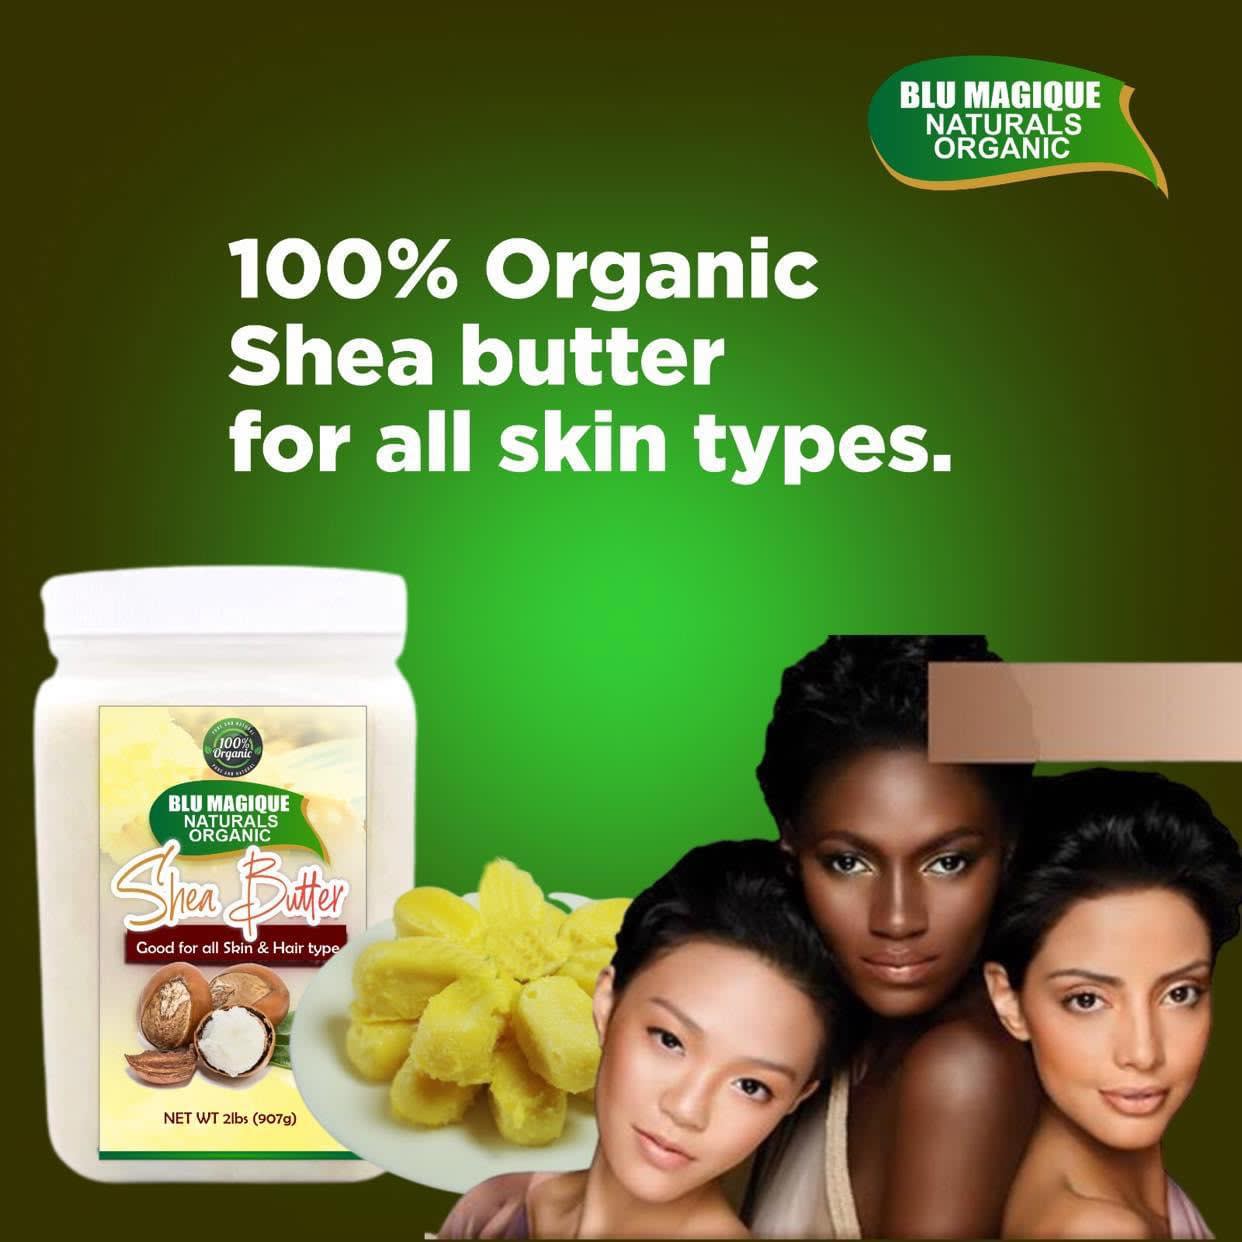 Shea Butter Benefits for all Skin Types